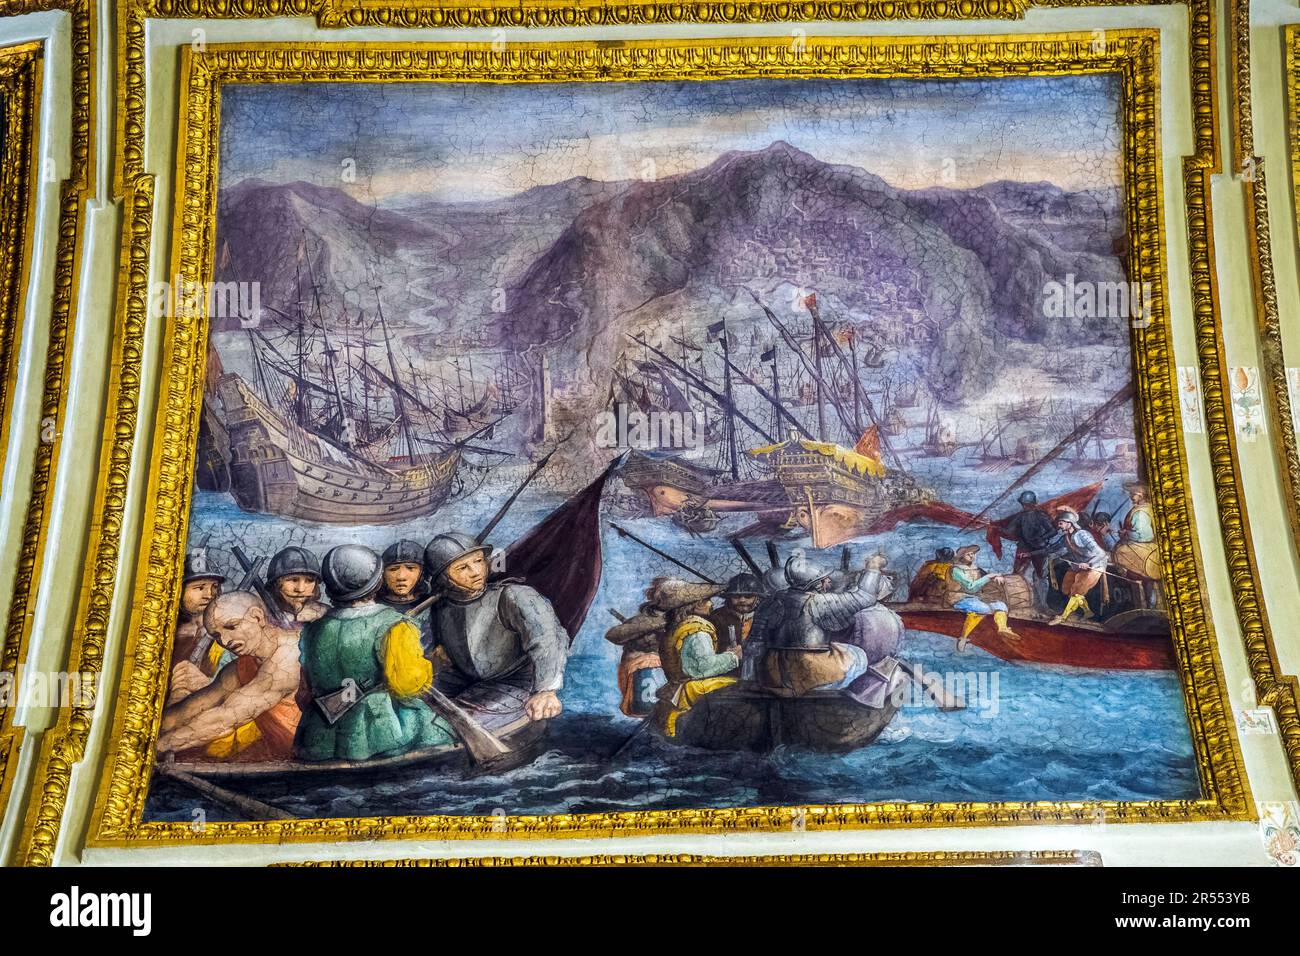 Painted ceiling framed by gilded stucco mouldings and inscriptions depicting the Spanish Reinforcements to Genoa under Siege by French - The ambassador's Hall in the Royal Palace of Naples that In 1734 became the royal residence of the Bourbons - Naples, Italy Stock Photo